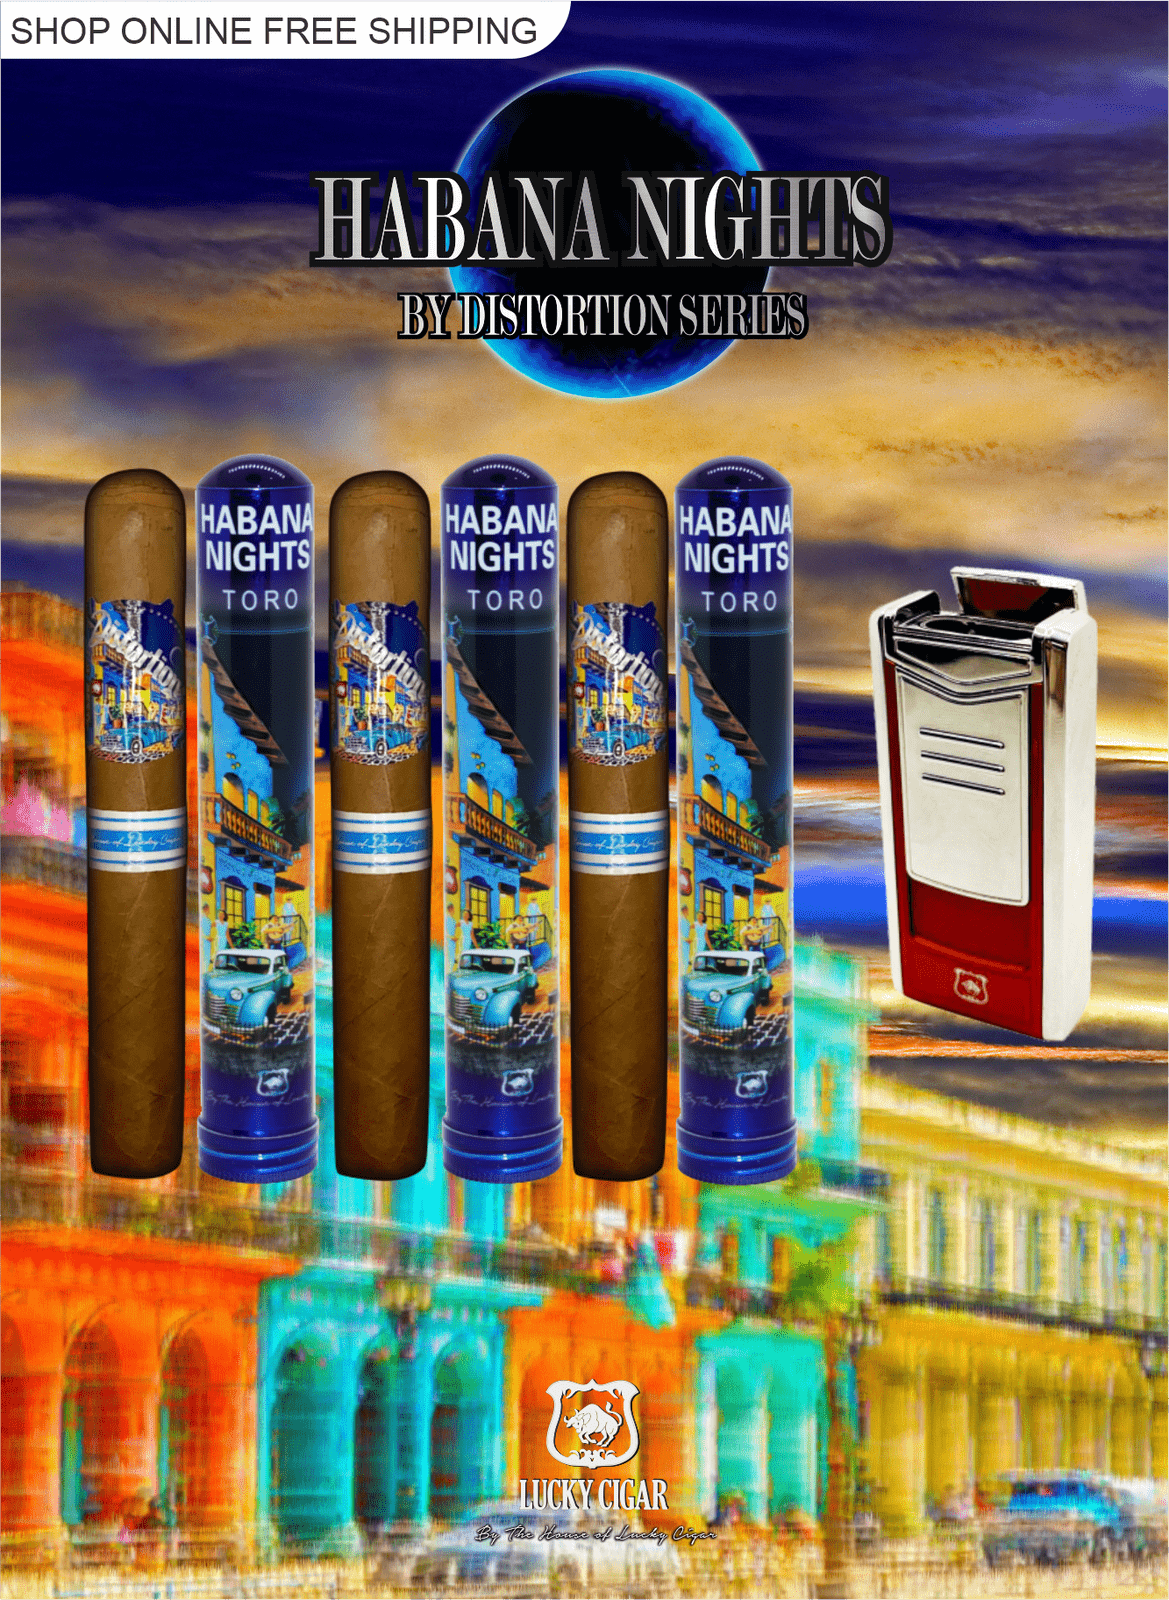 Habana Nights 6x50 Cigar From The Distortion Series: 3 Cigars with Lighter